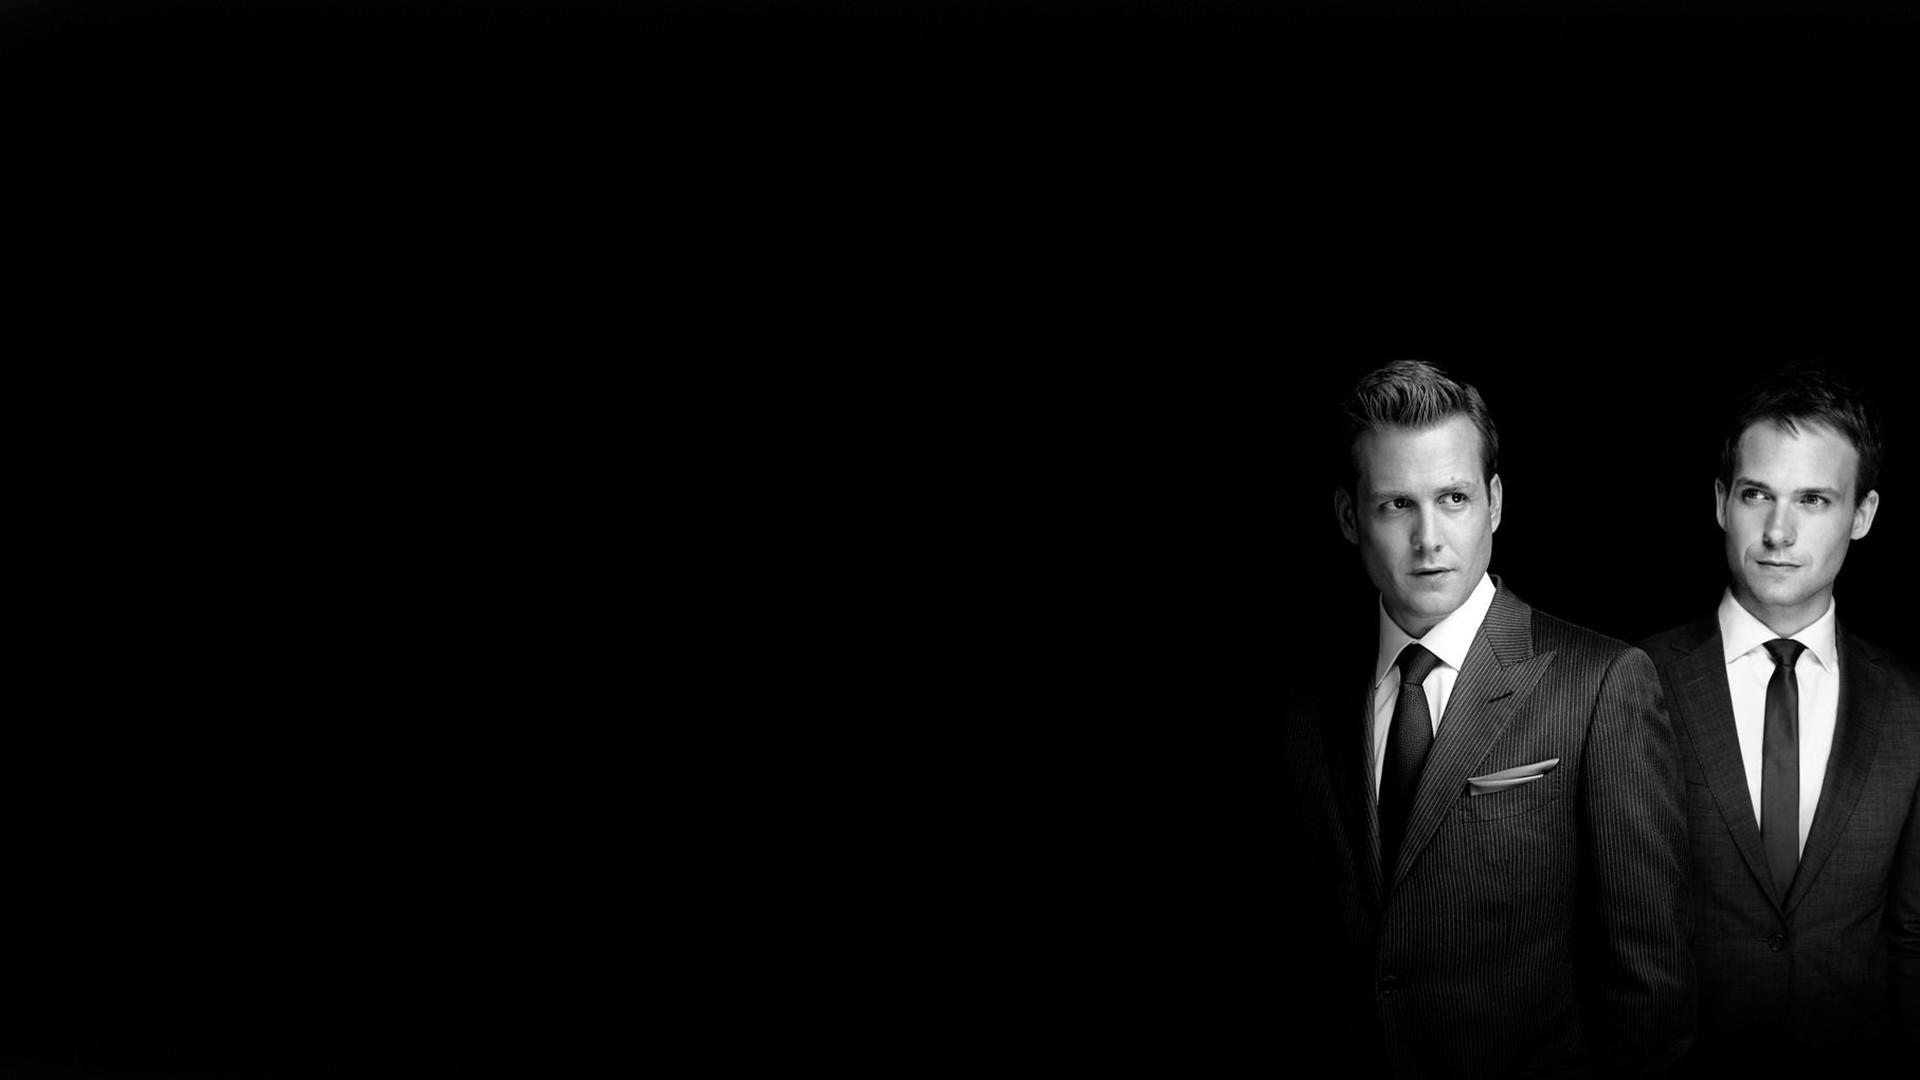 1920x1080 Suits TV Series Wallpapers Are Free To Download In Different Sizes For Your  Gadgets, Desktop